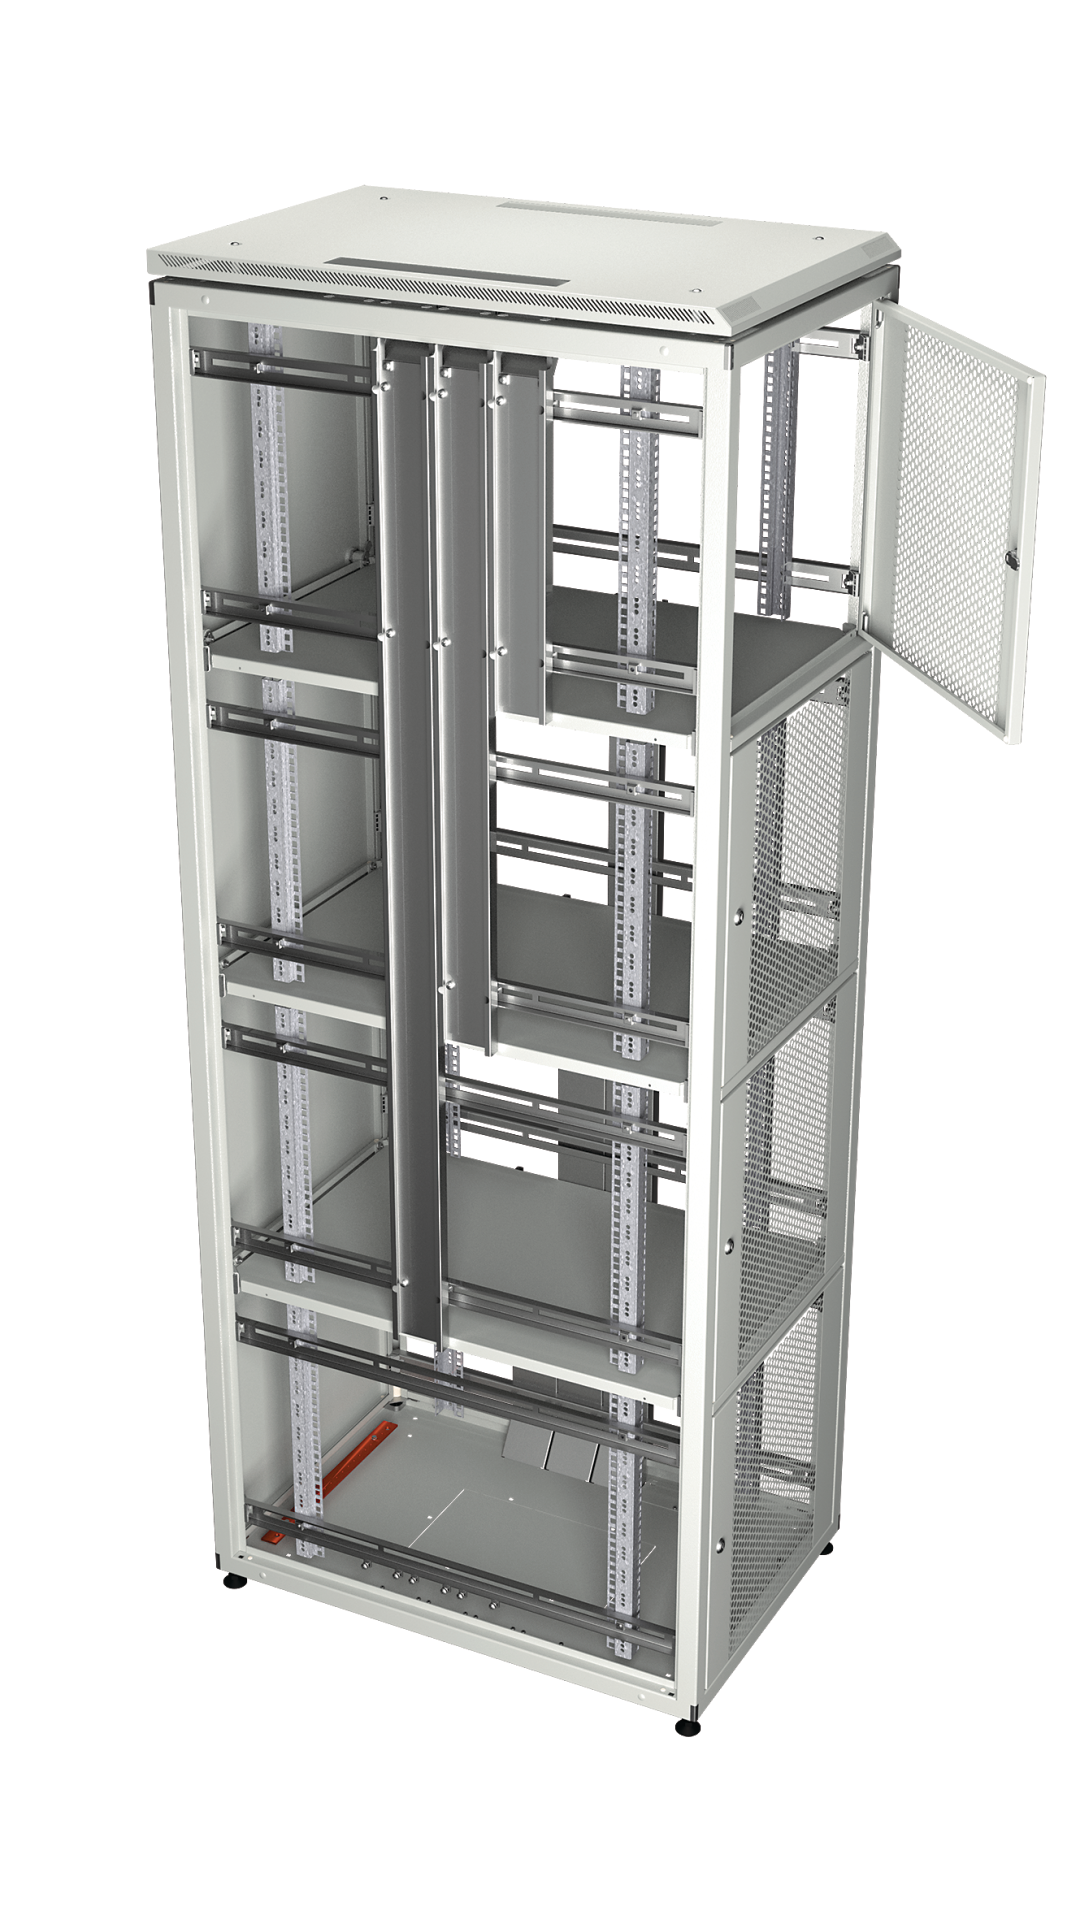 Co-Location Rack PRO, 1 x 42HE, 600x1200 mm, F+R 1-tlg. perforiert, RAL9005